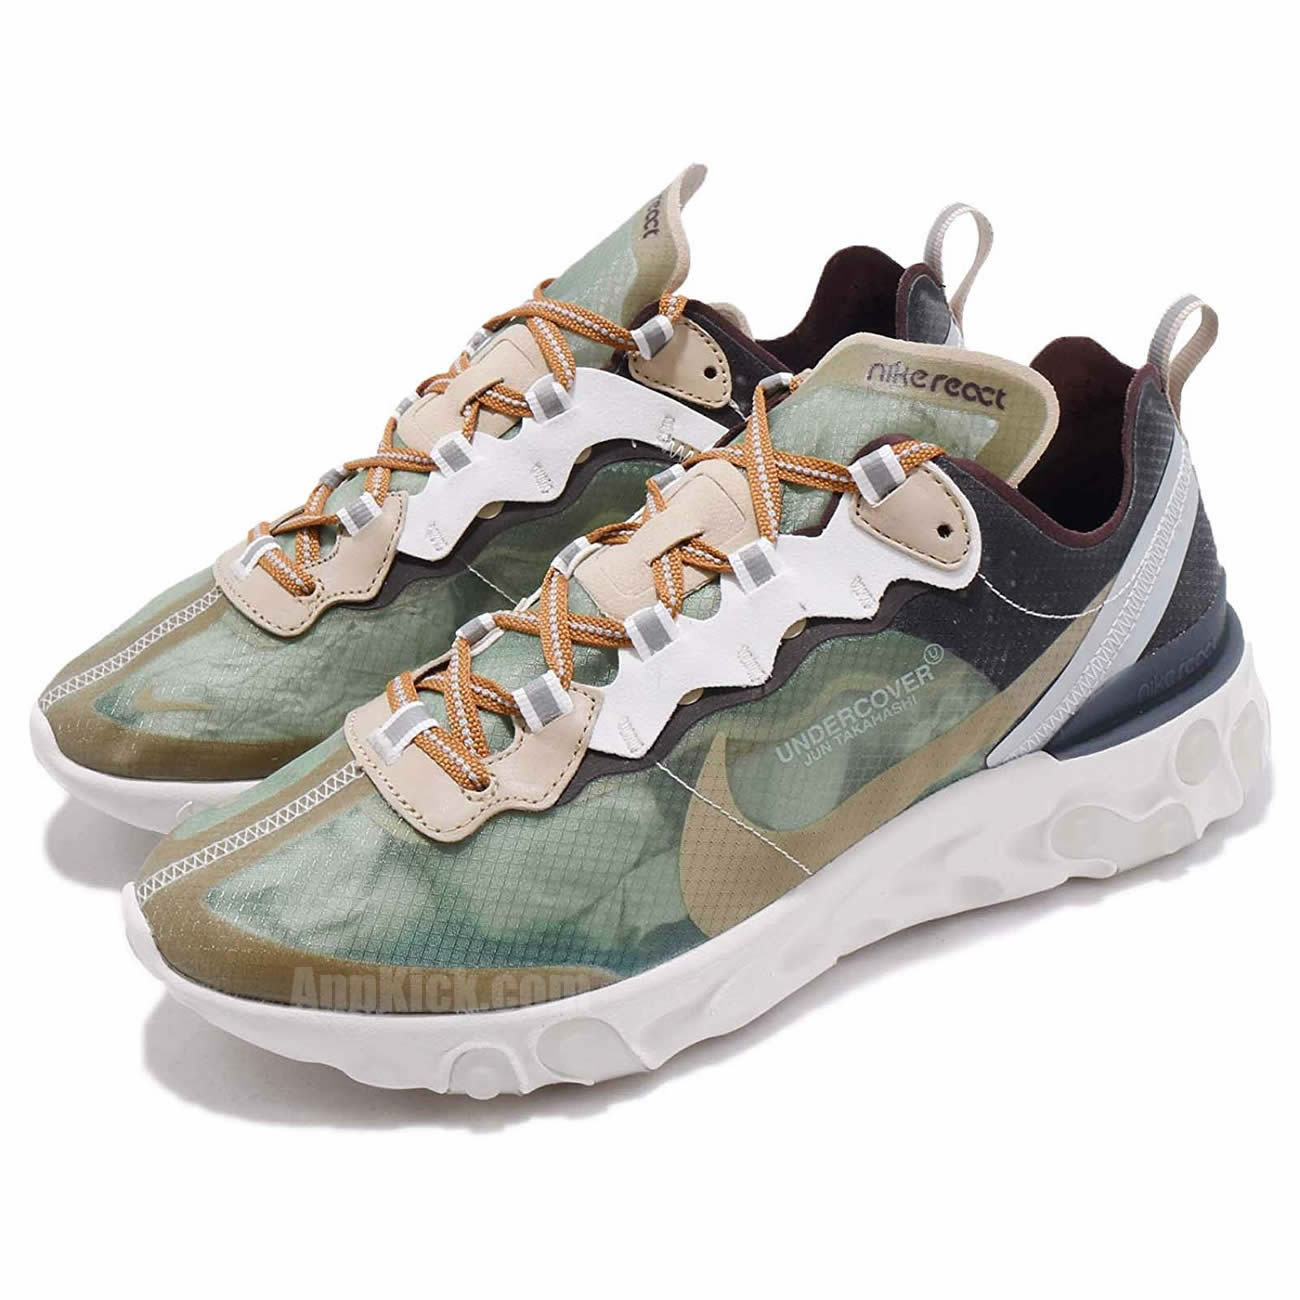 Undercover x Nike React Element 87 'Green Mist' Shoes Collection BQ2718-300